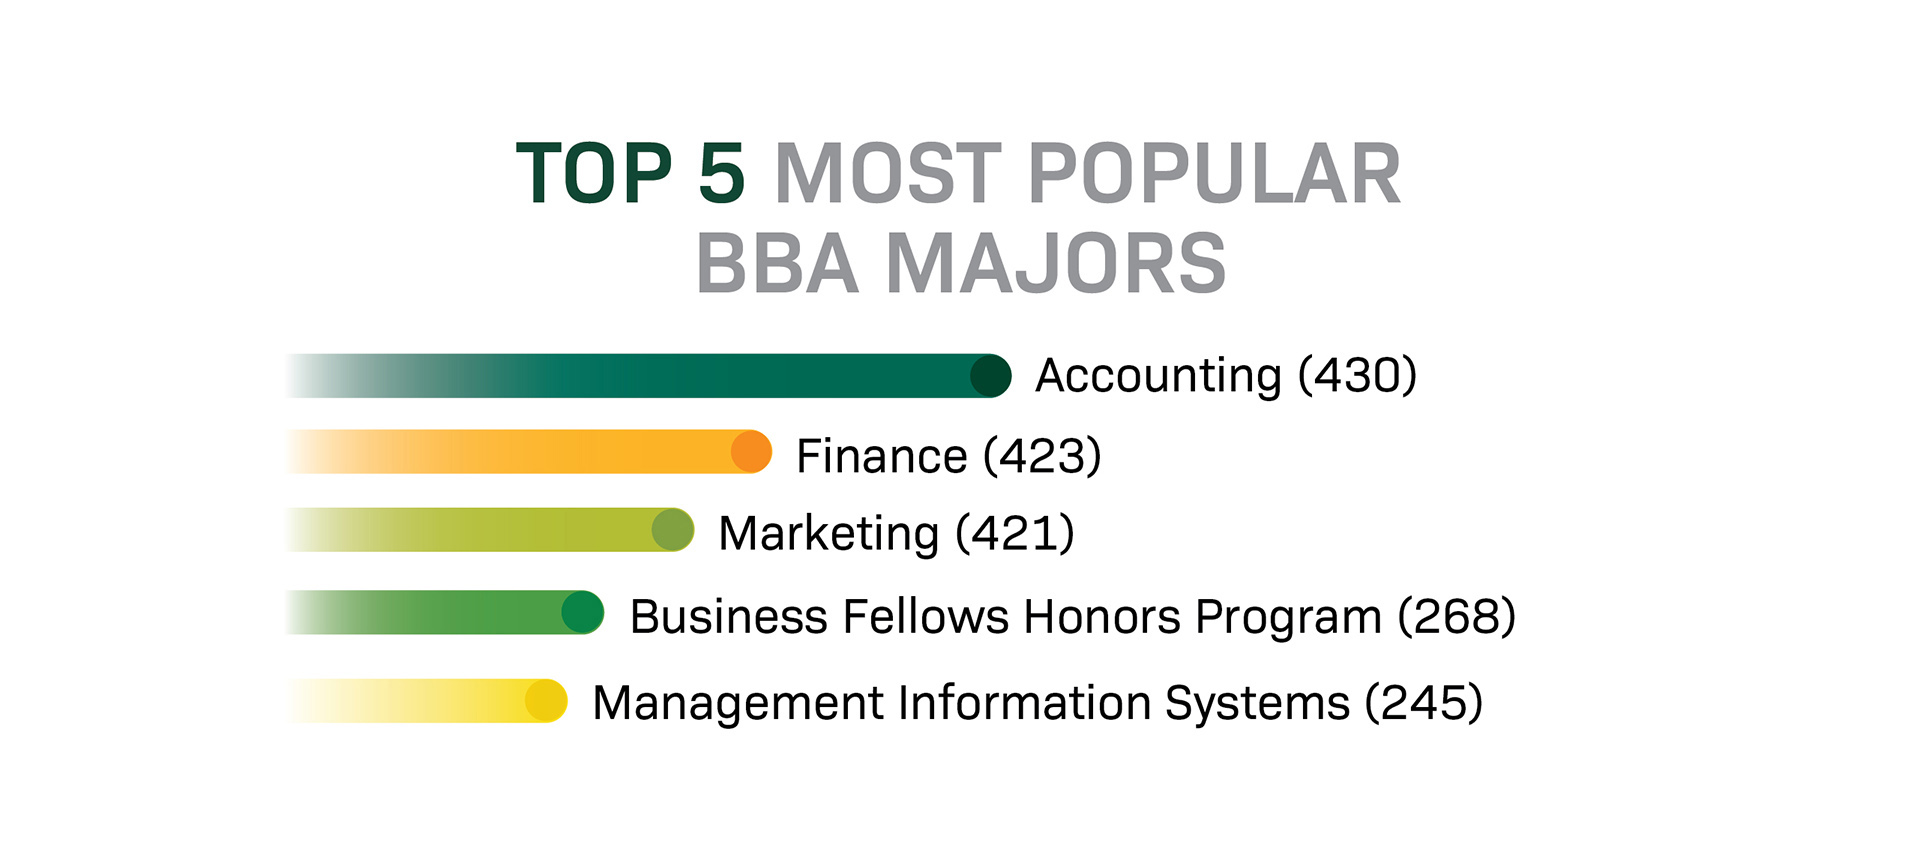 Infographic showing top 5 most popular BBA majors